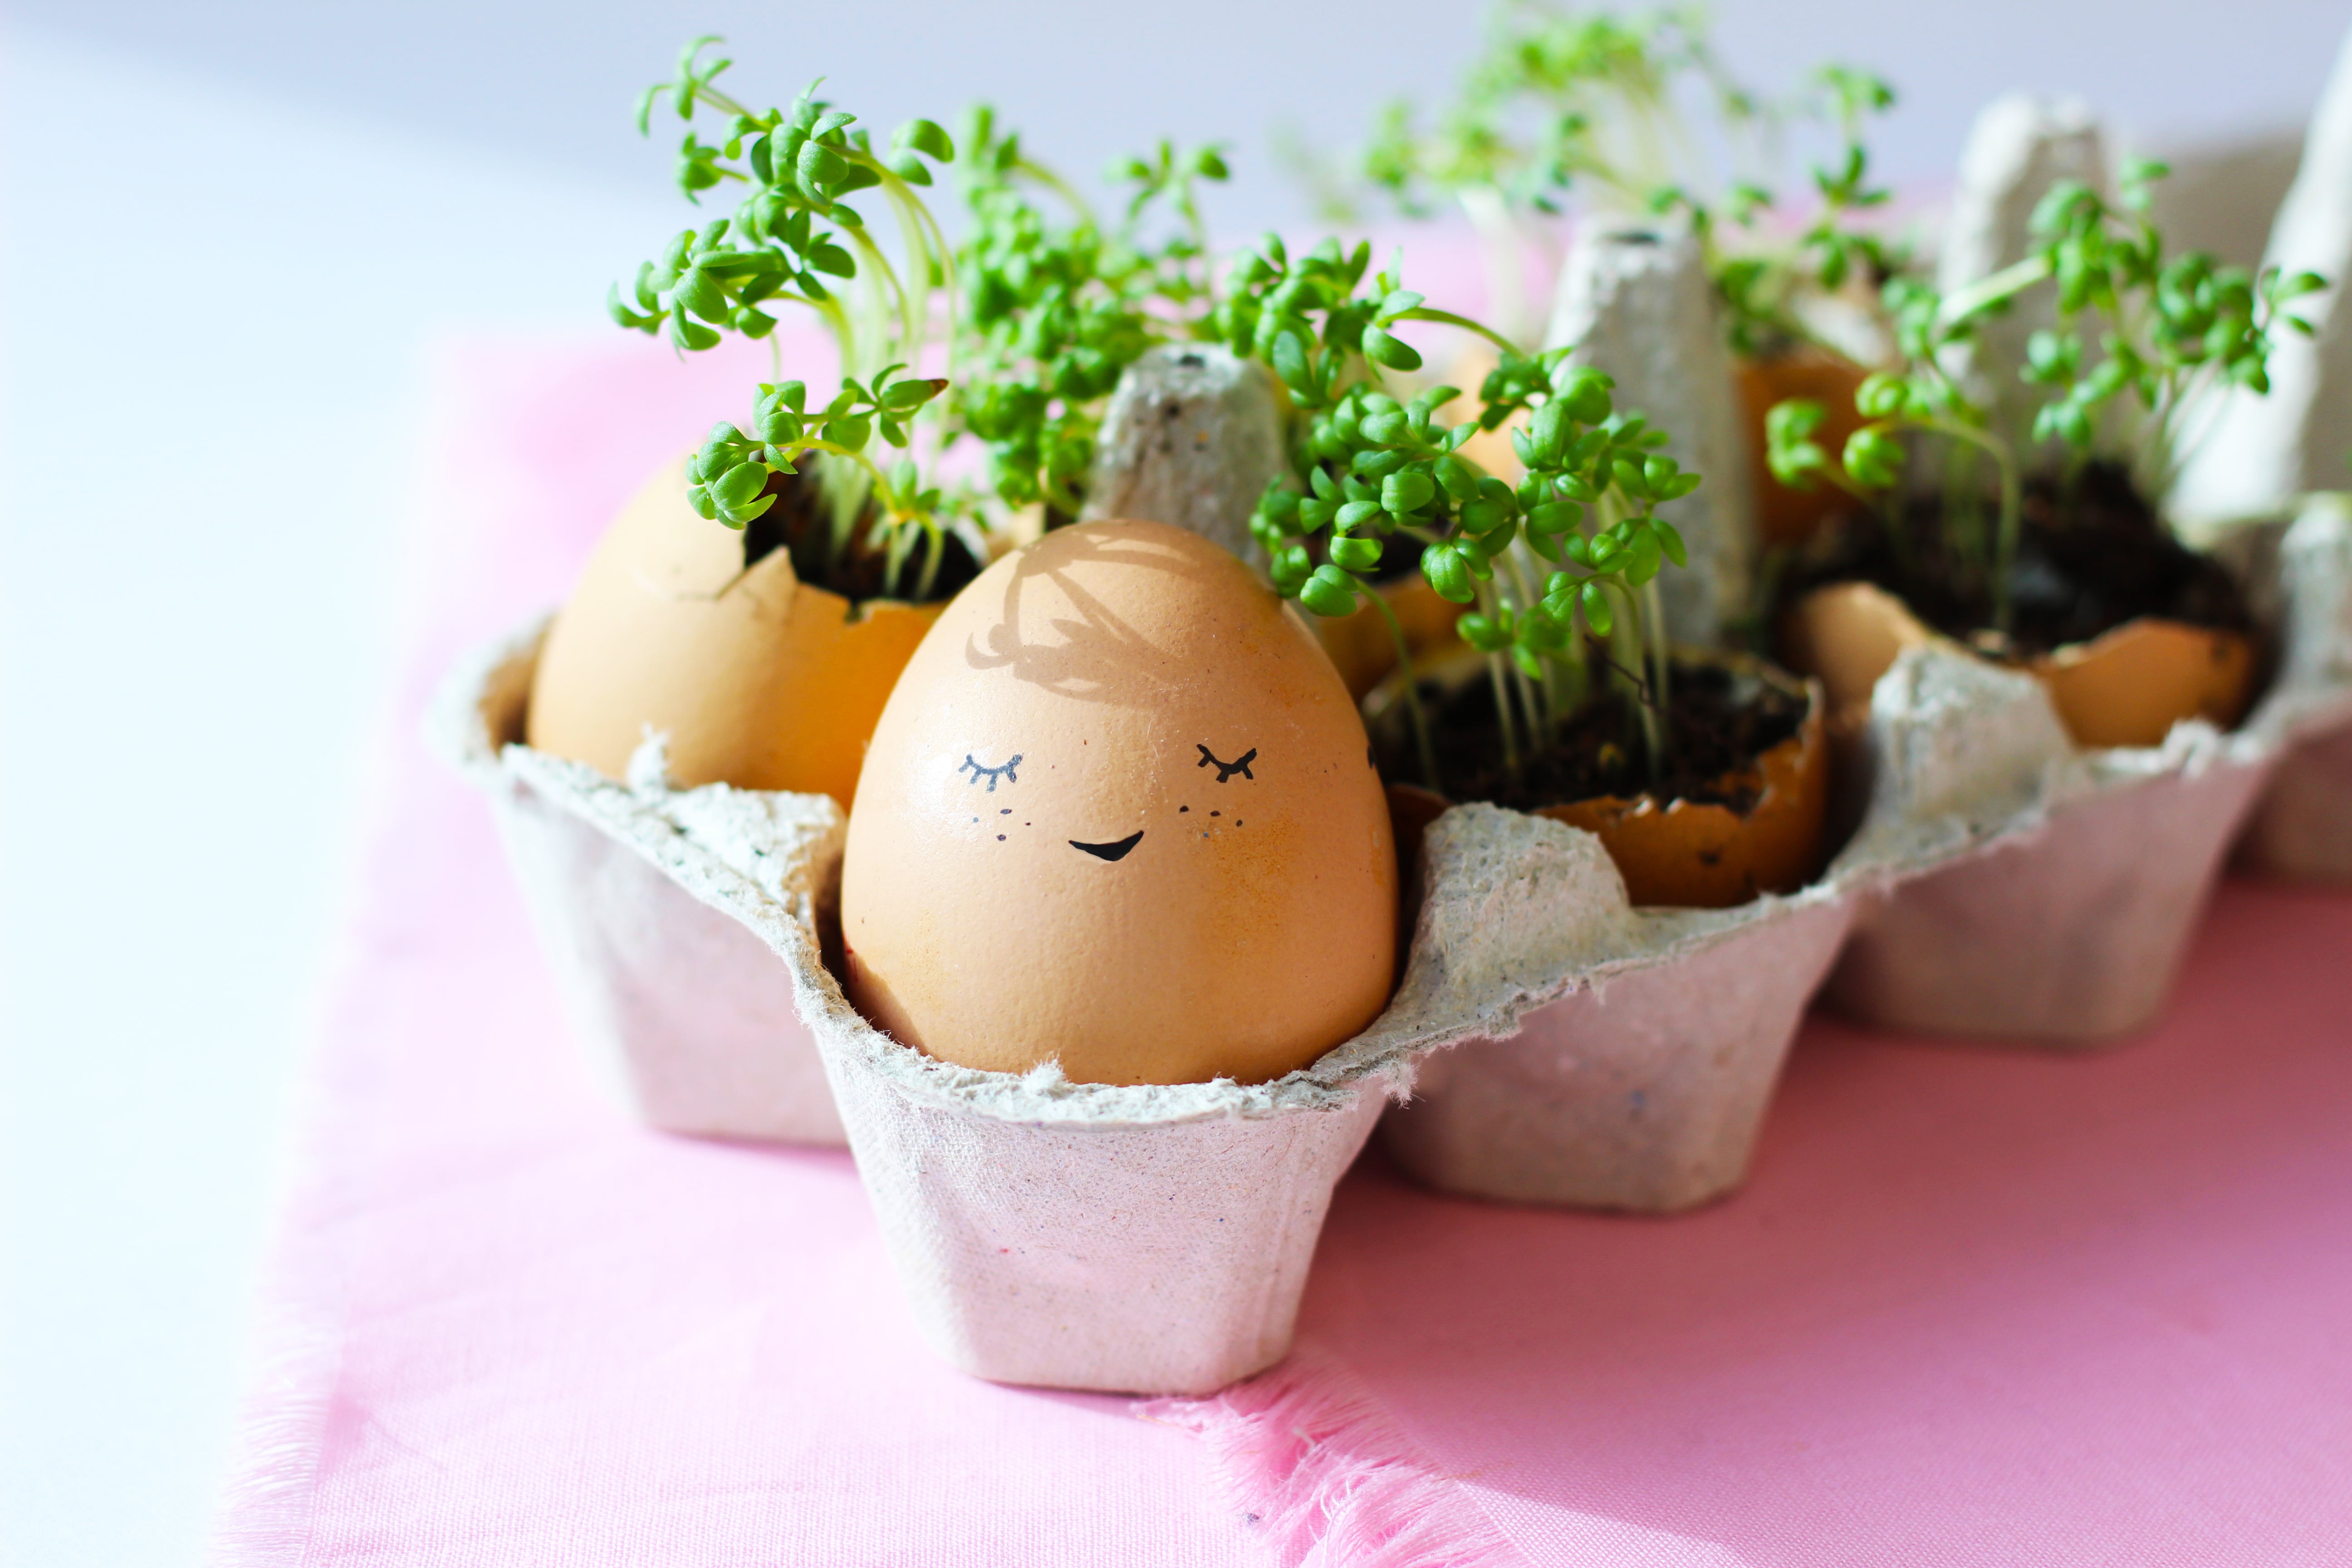 An egg box full of eggshells beginning to sprout cress after planting seeds.